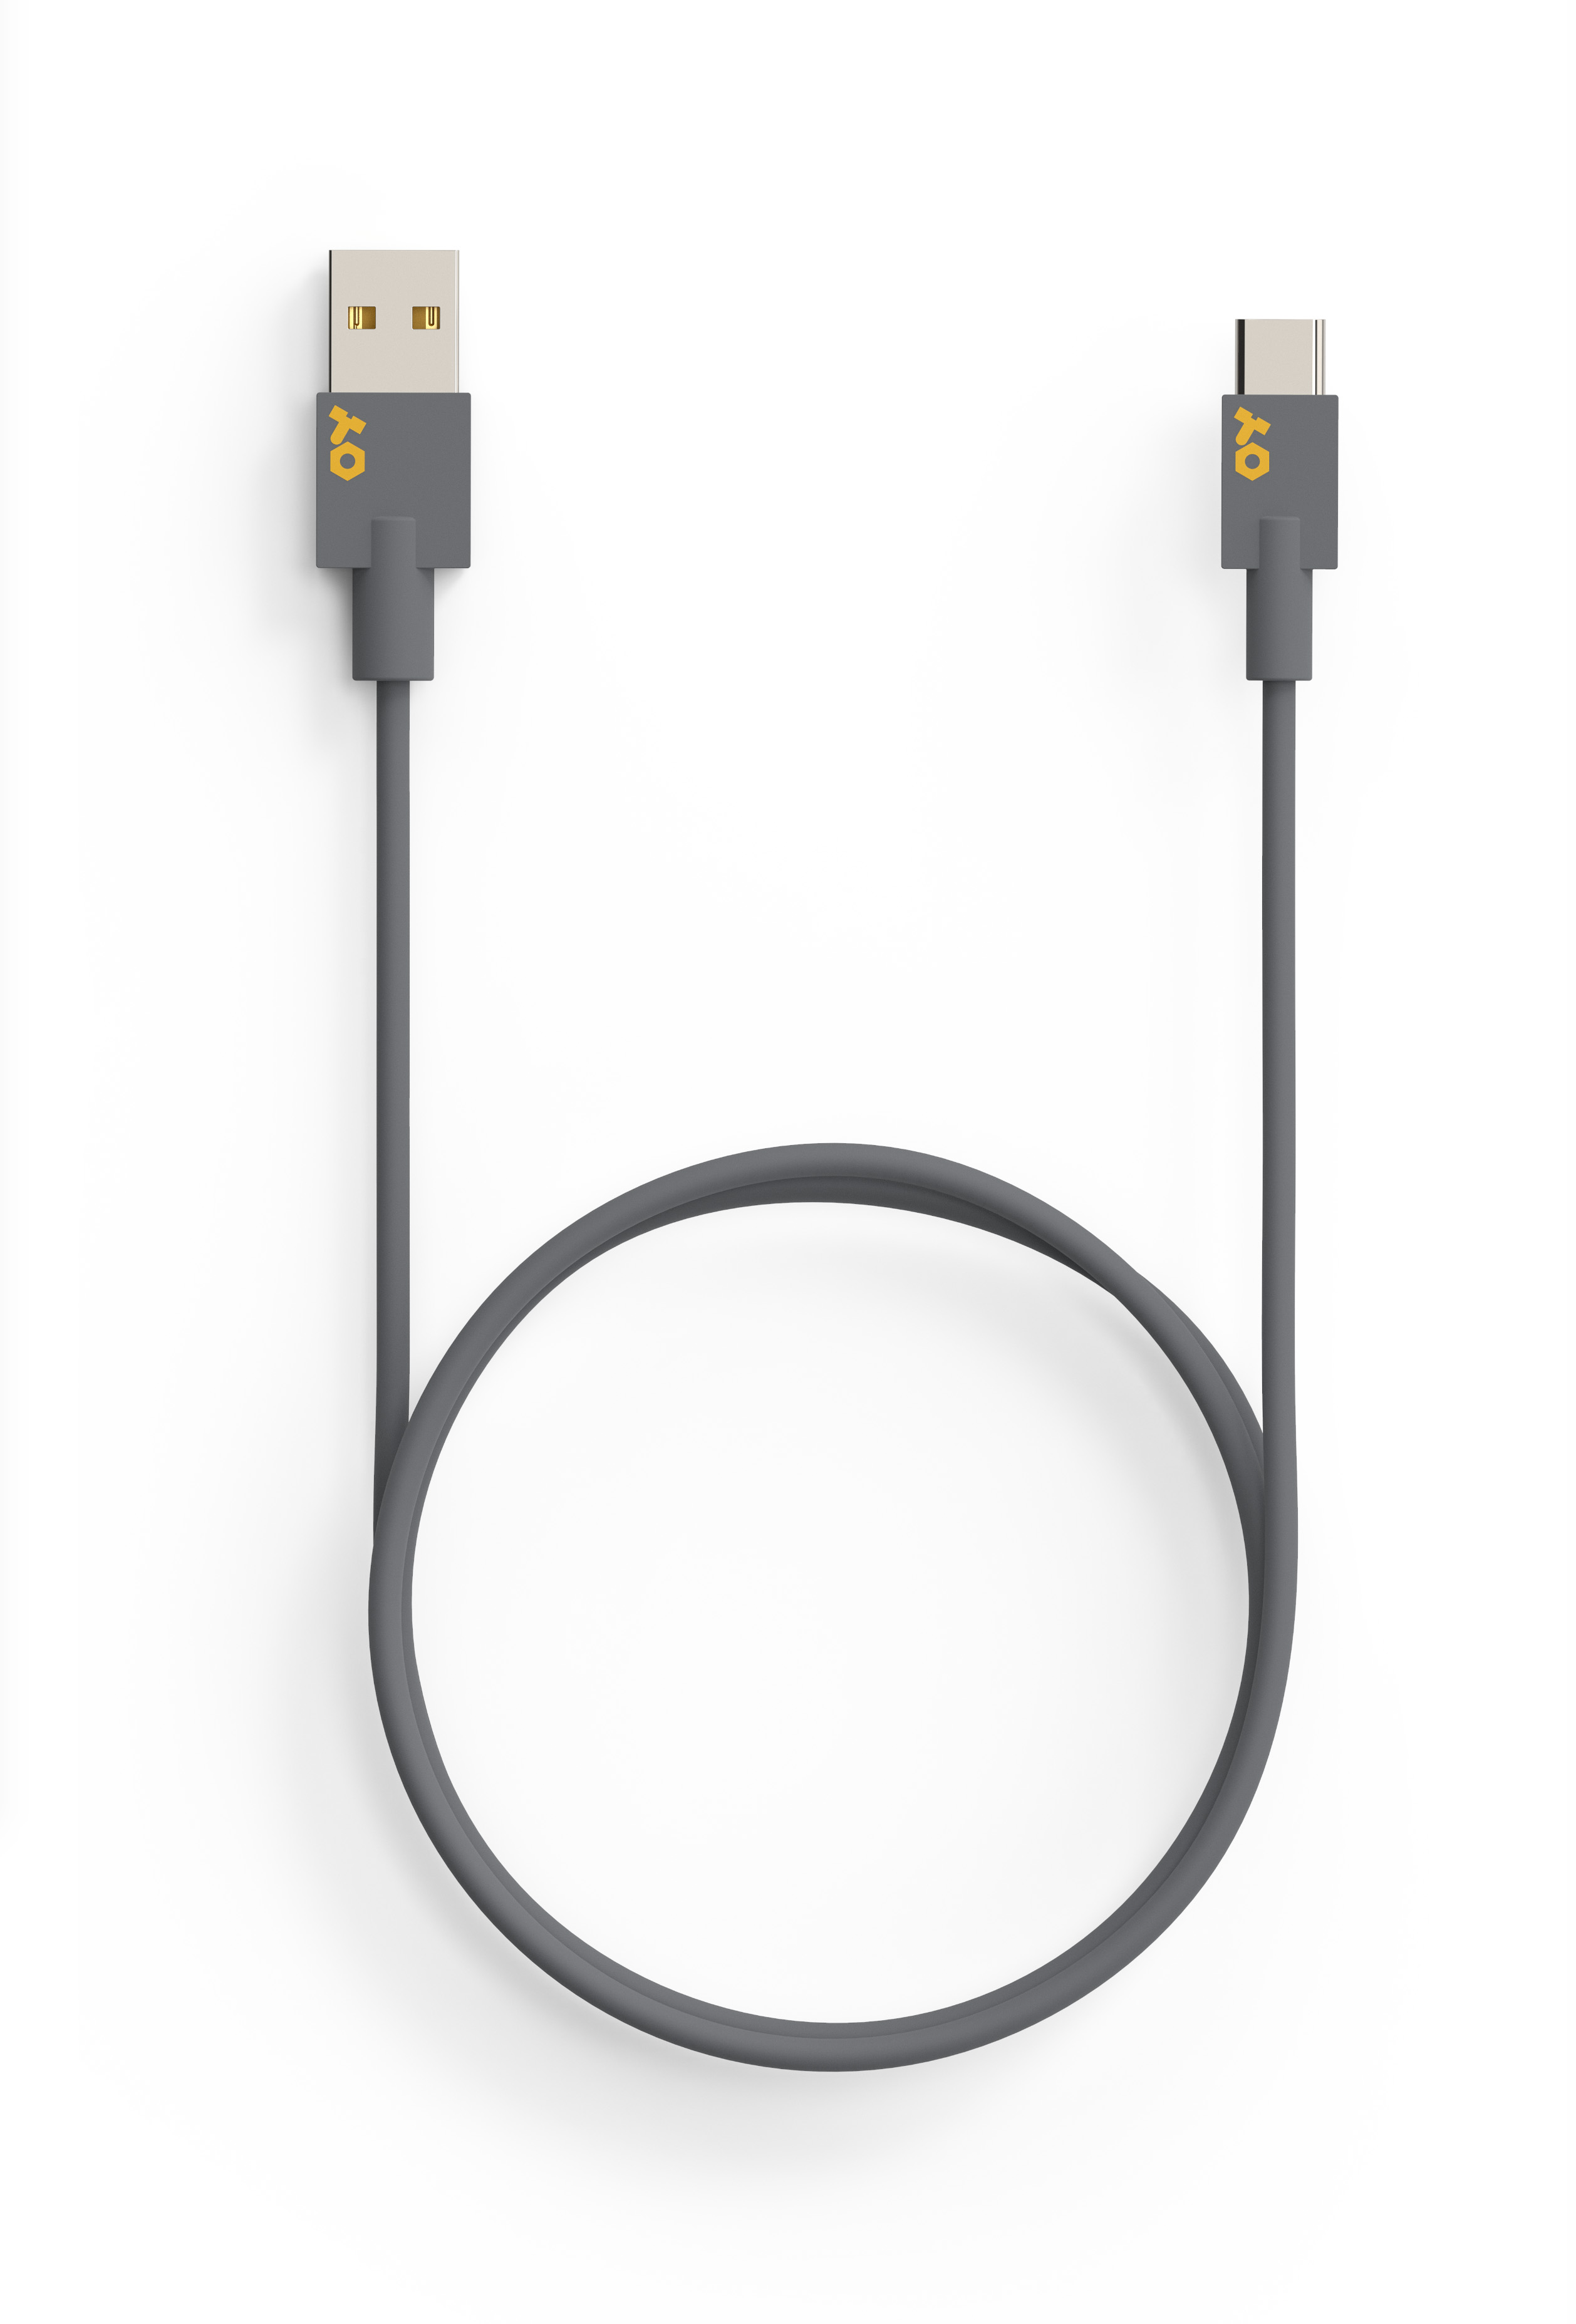 USB-A to USB-C Cable Design and render for teenage engineering 2017